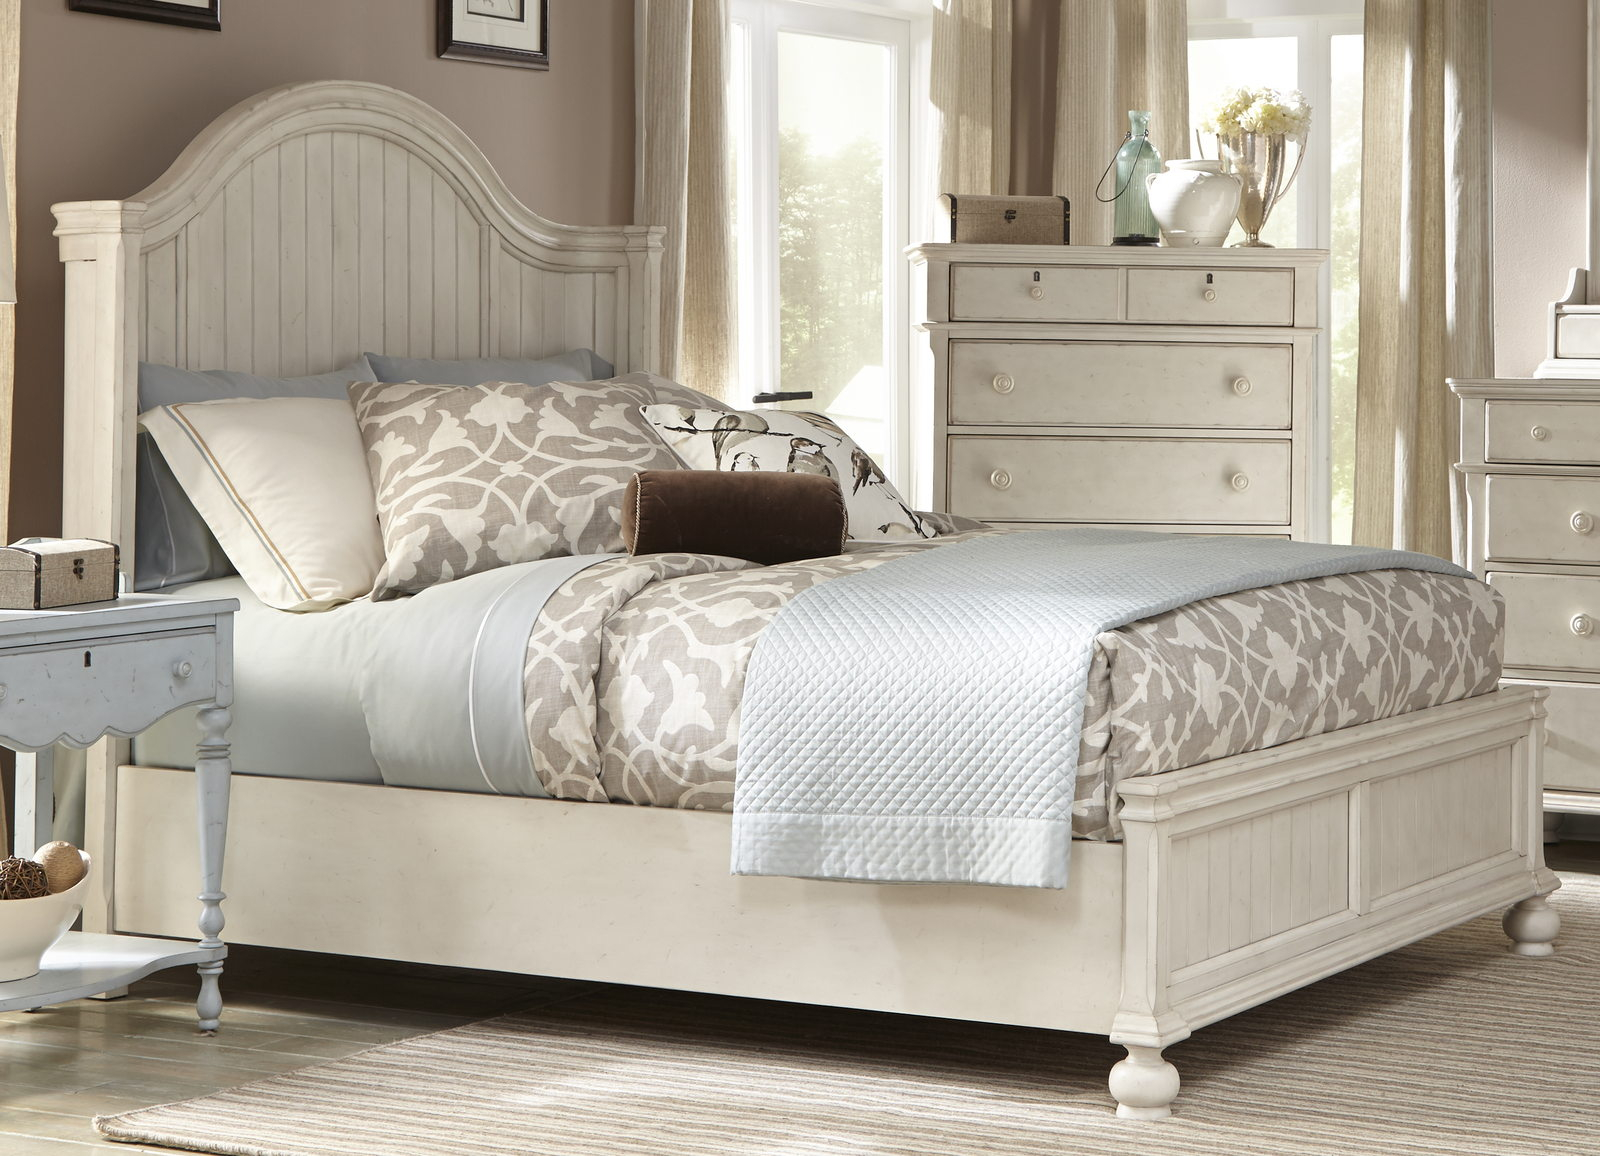 American Woodcrafters Newport 4 Piece Panel Bedroom Set In Antique White throughout measurements 1600 X 1156